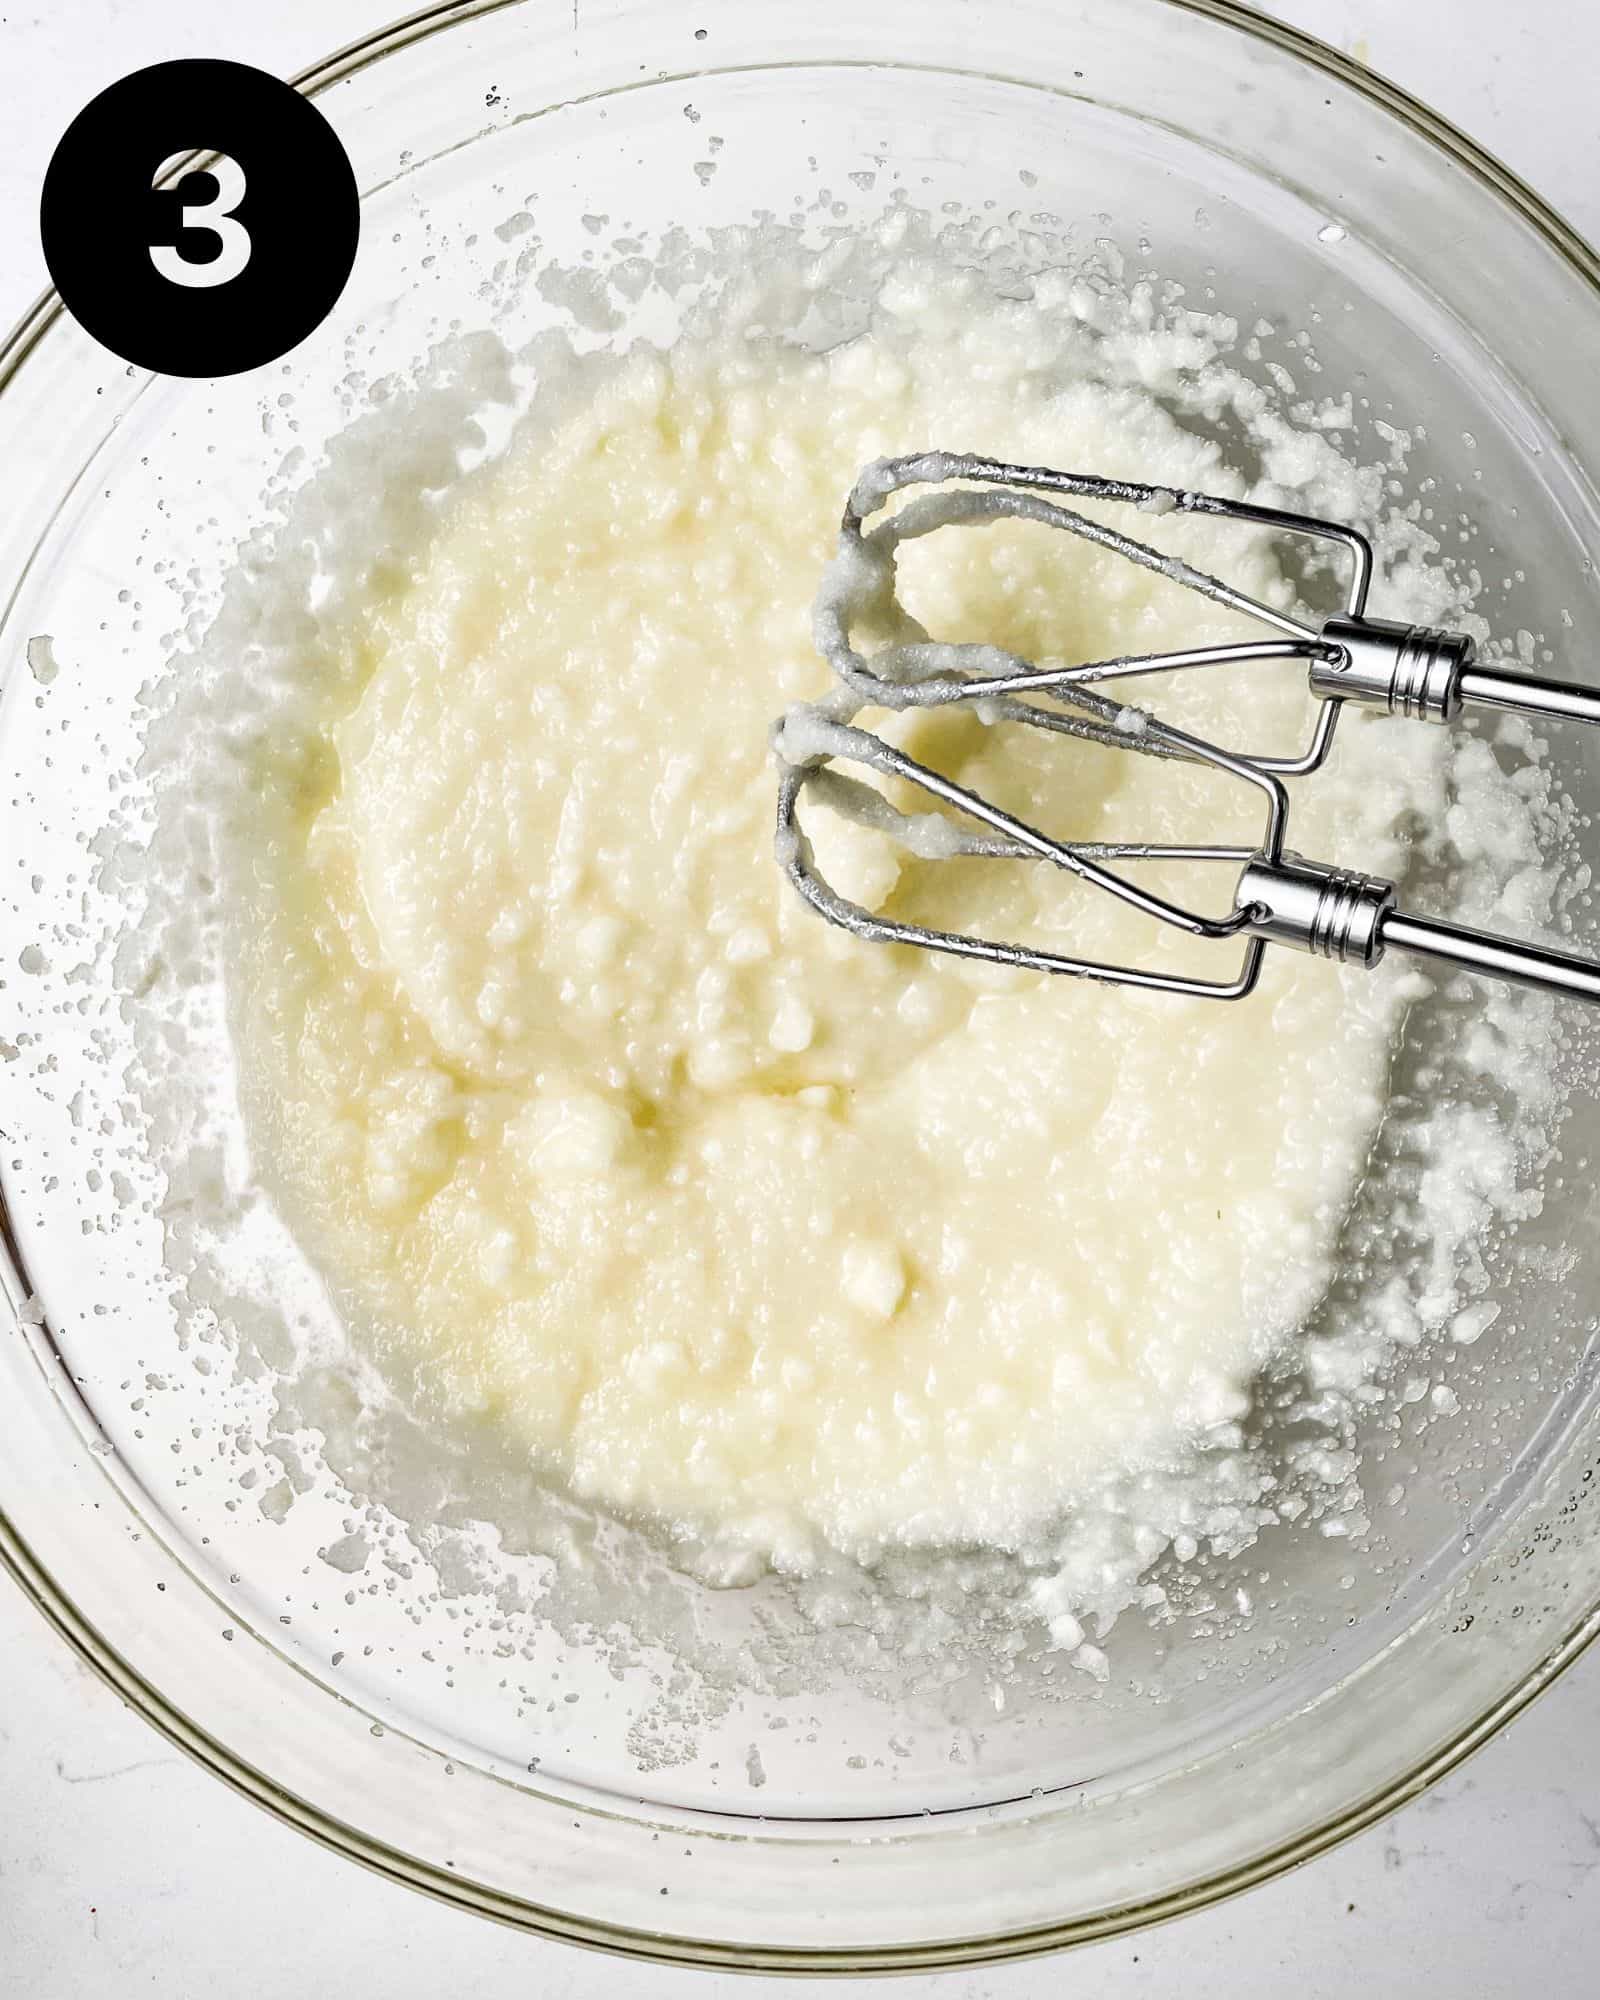 butter, oil, and sugar mixed together in a bowl.